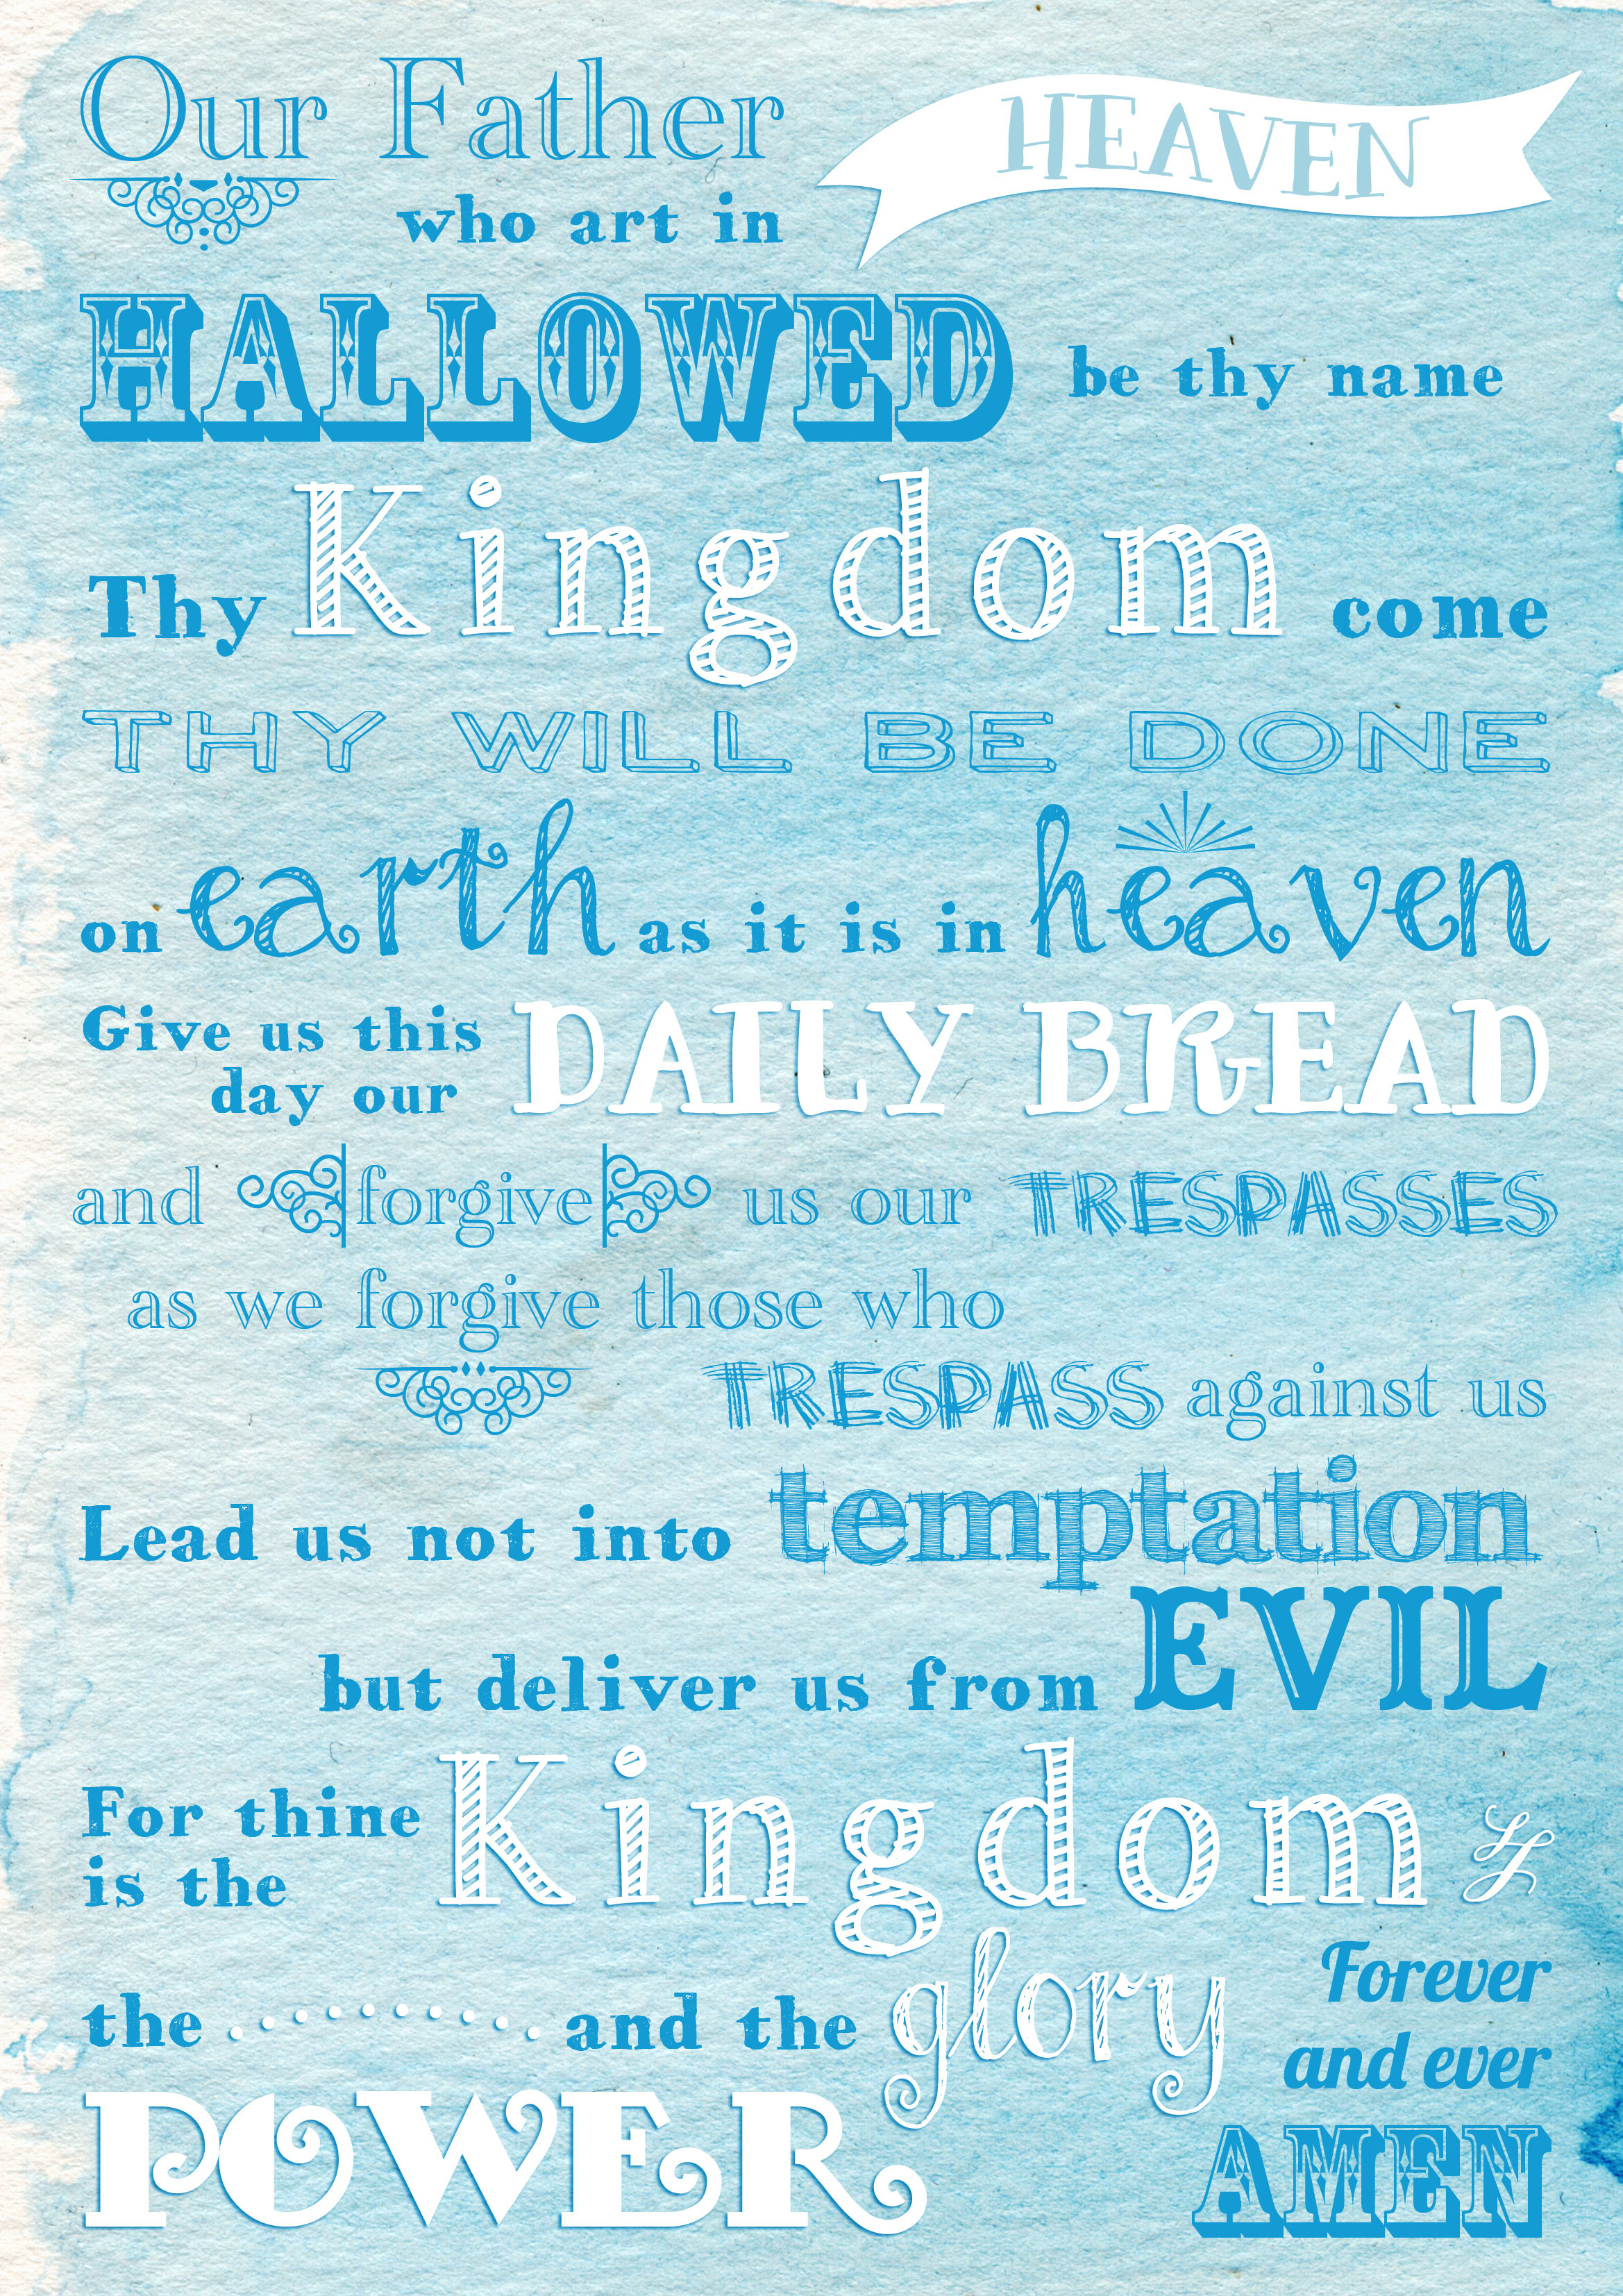 Lords Prayer Background The lords prayer free